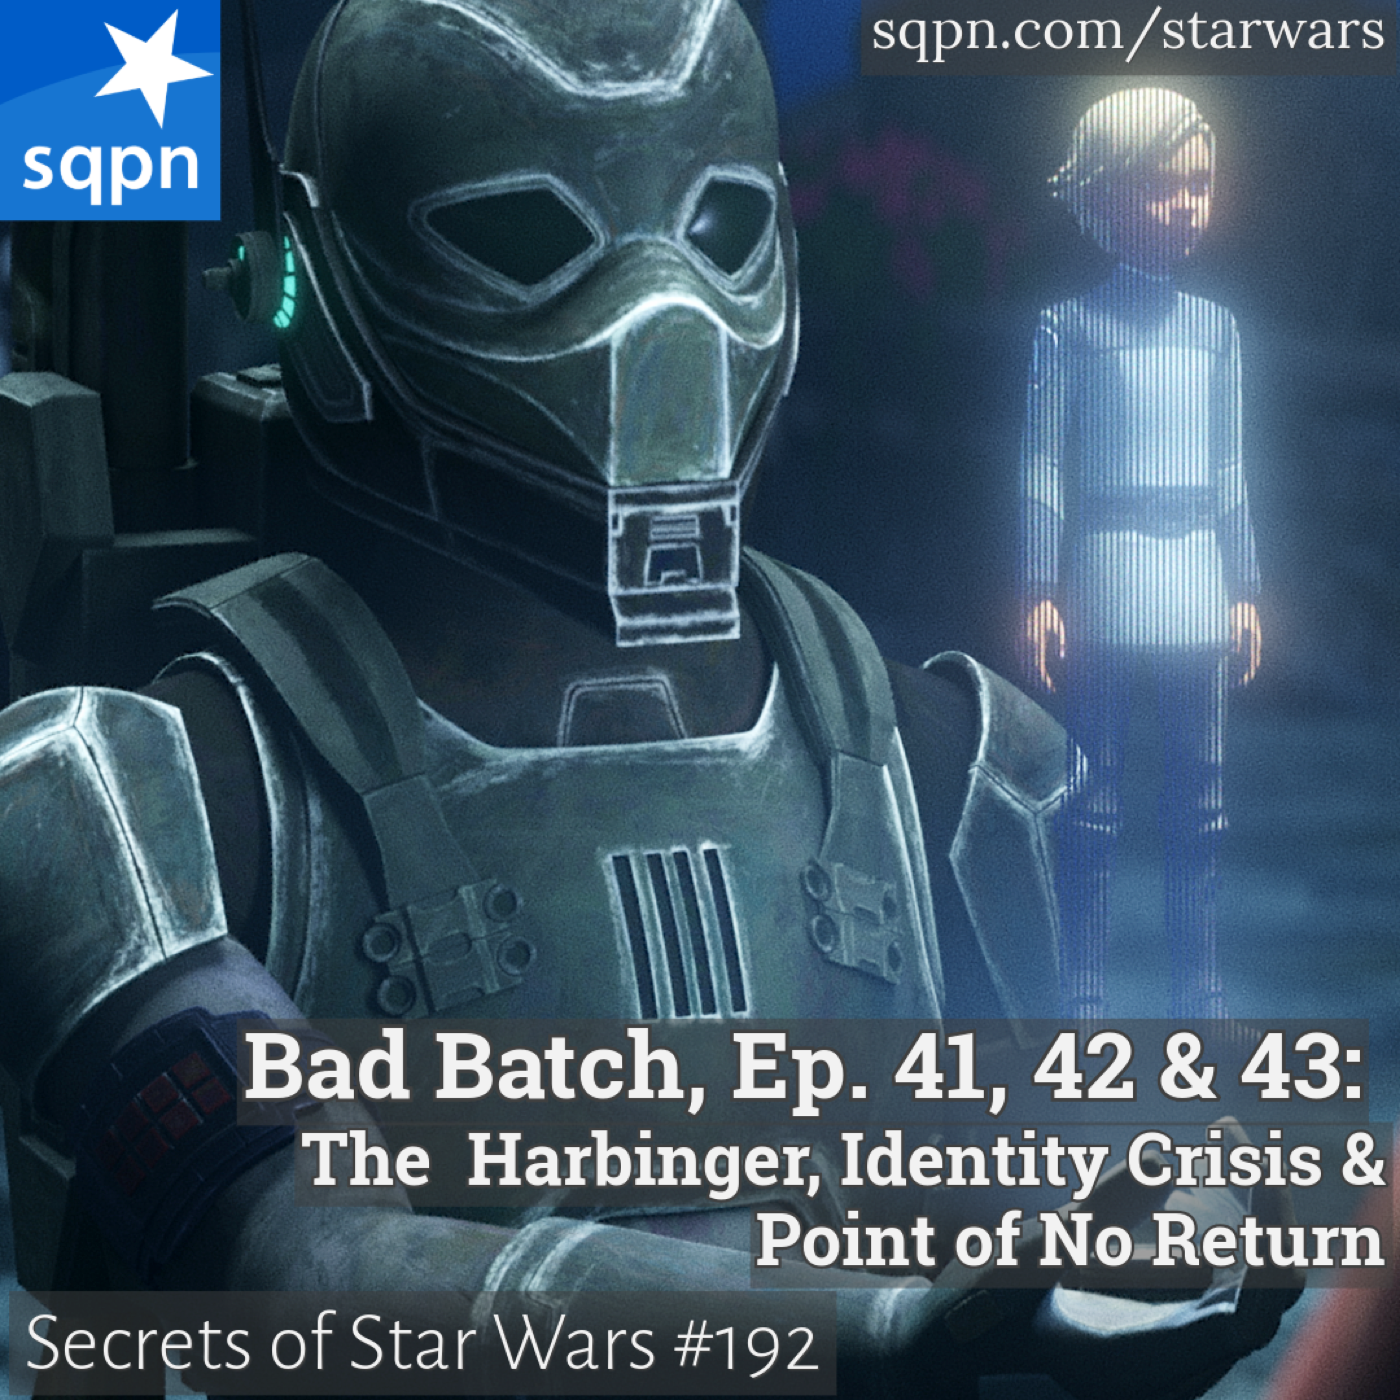 The Bad Batch – Ep. 41, 42 & 43: The Harbinger, Identity Crisis, and Point of No Return